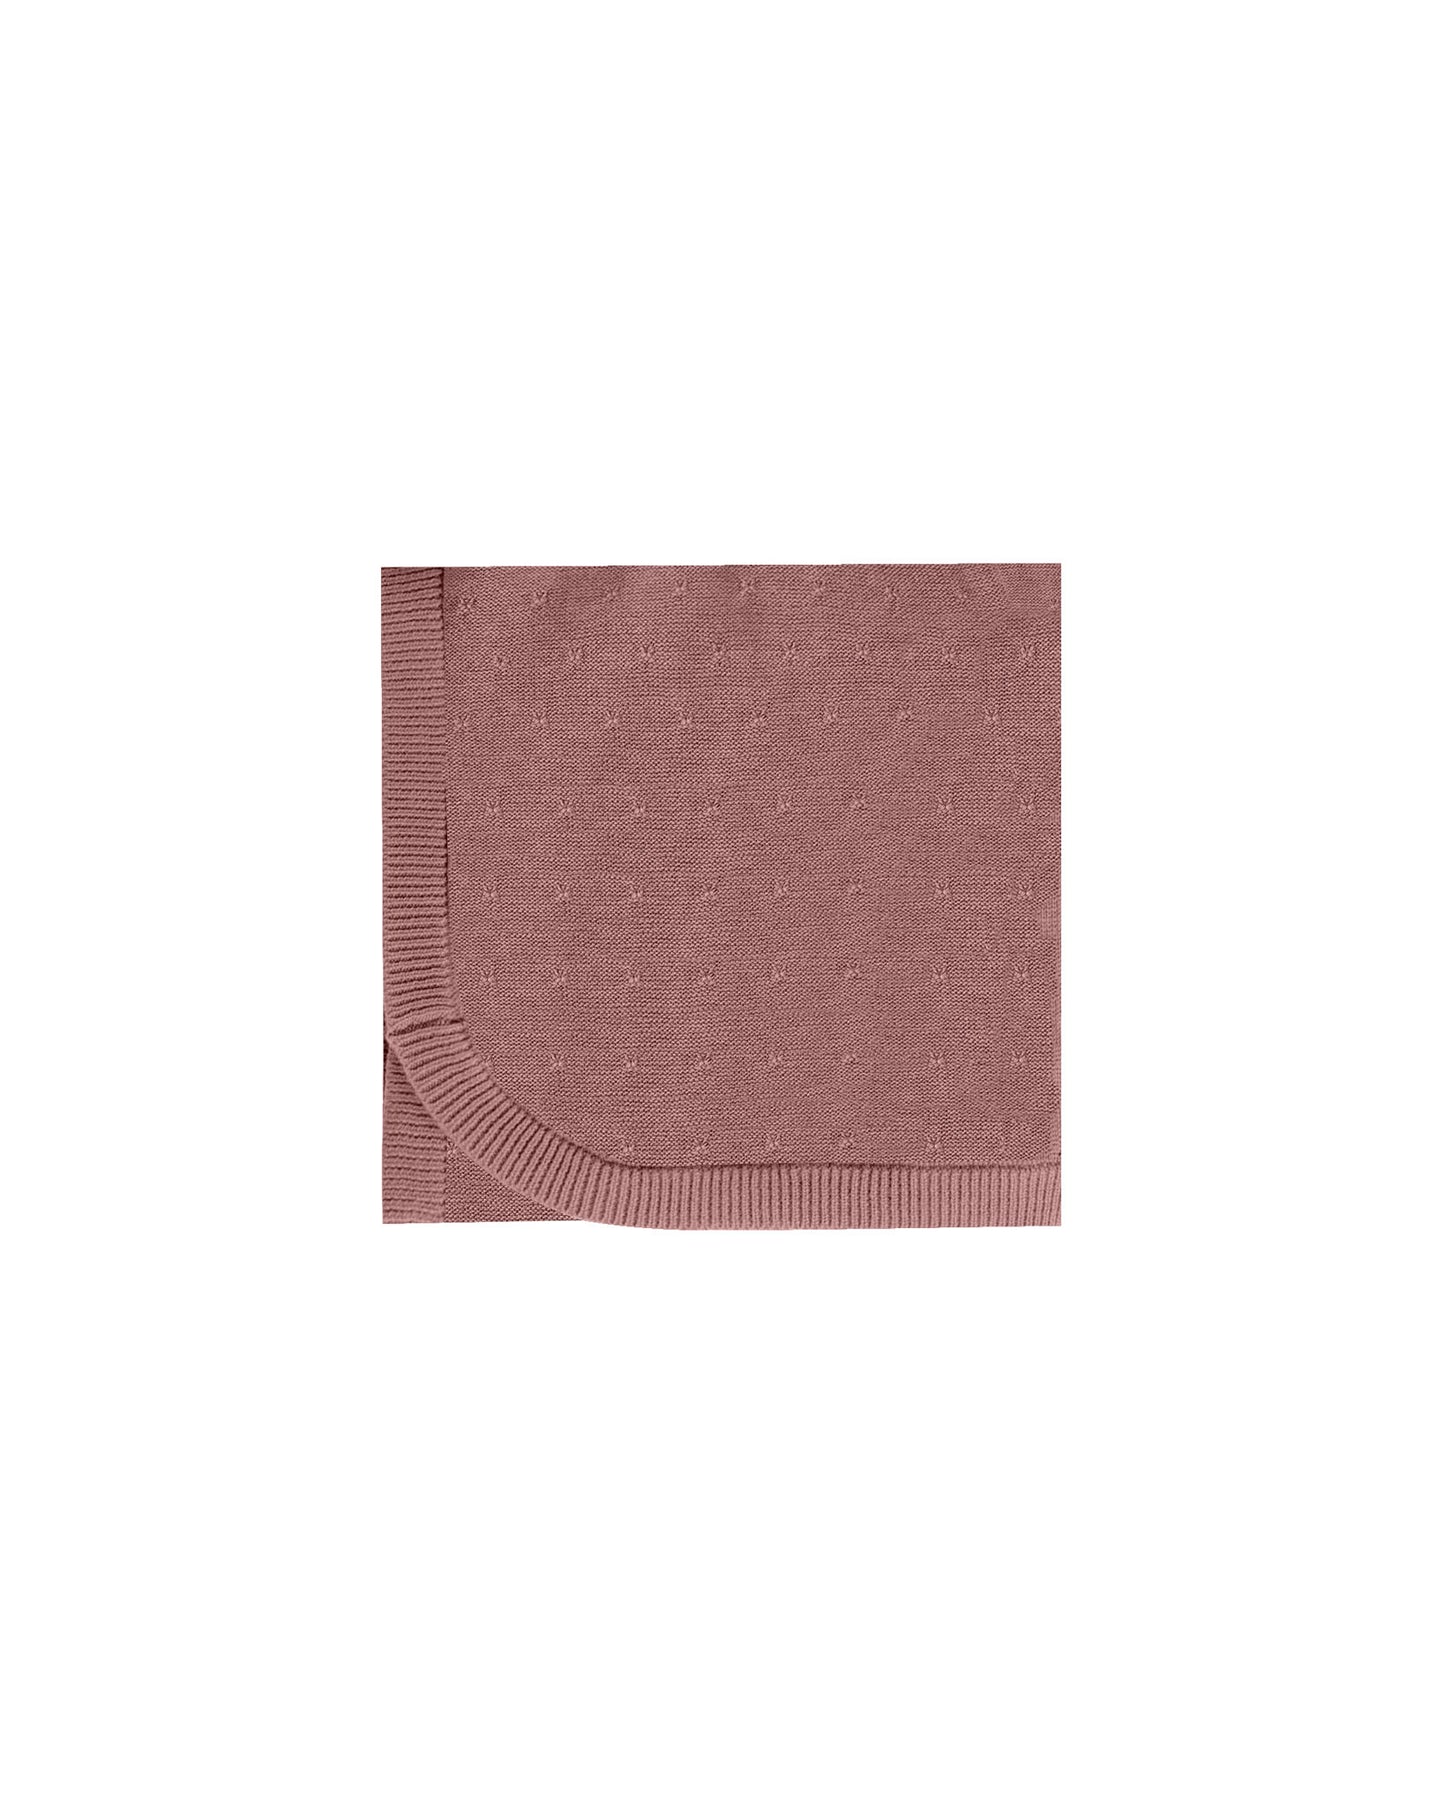 Quincy Mae Knit Baby Blanket Fig